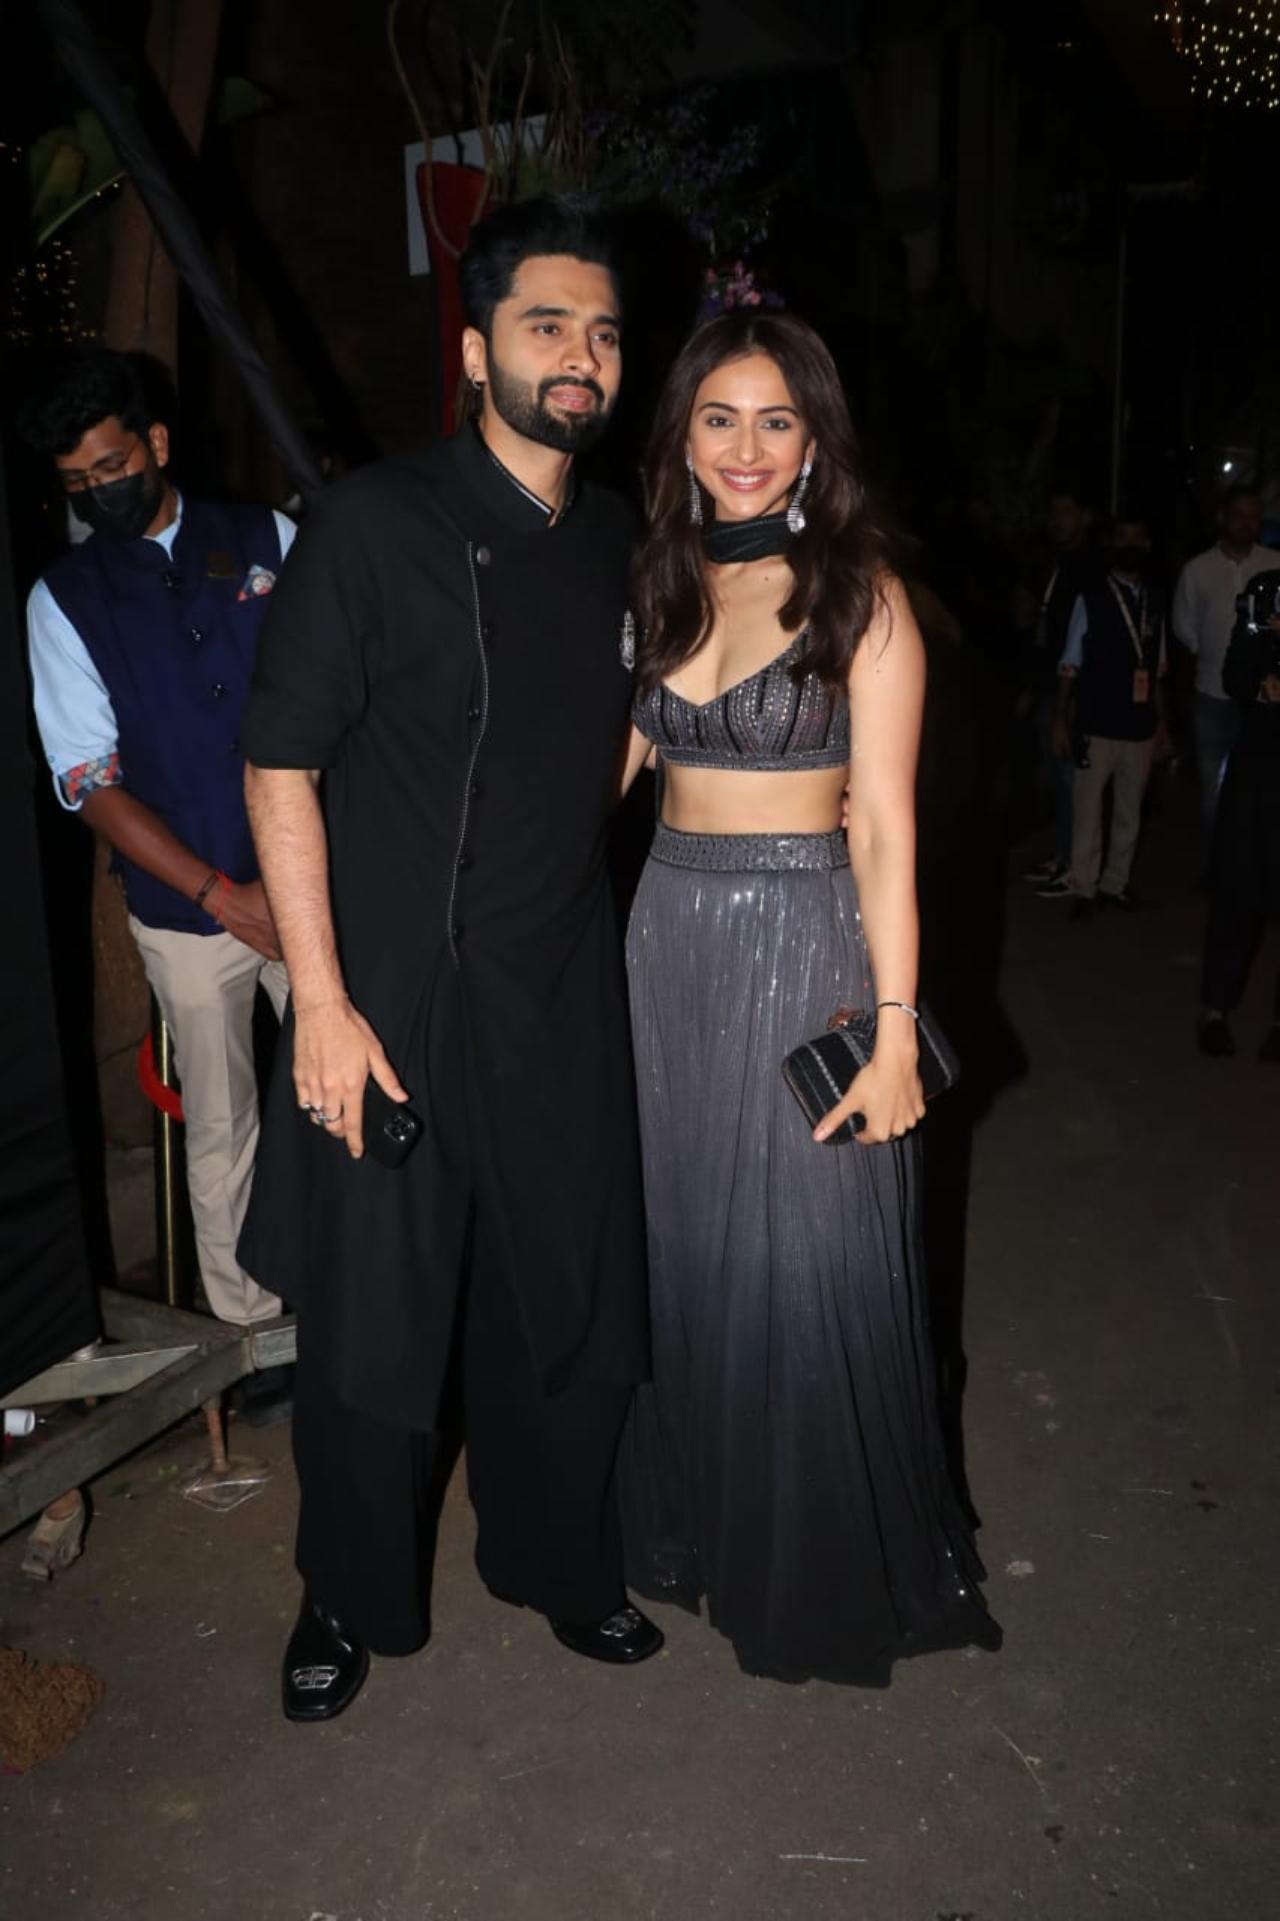 Jaccky and Rakul walked hand-in-hand to the party and also posed together for the paparazzi. While Rakul looked stunning in a grey shimmery lehenga, Jaccky can be seen sporting a black traditional look